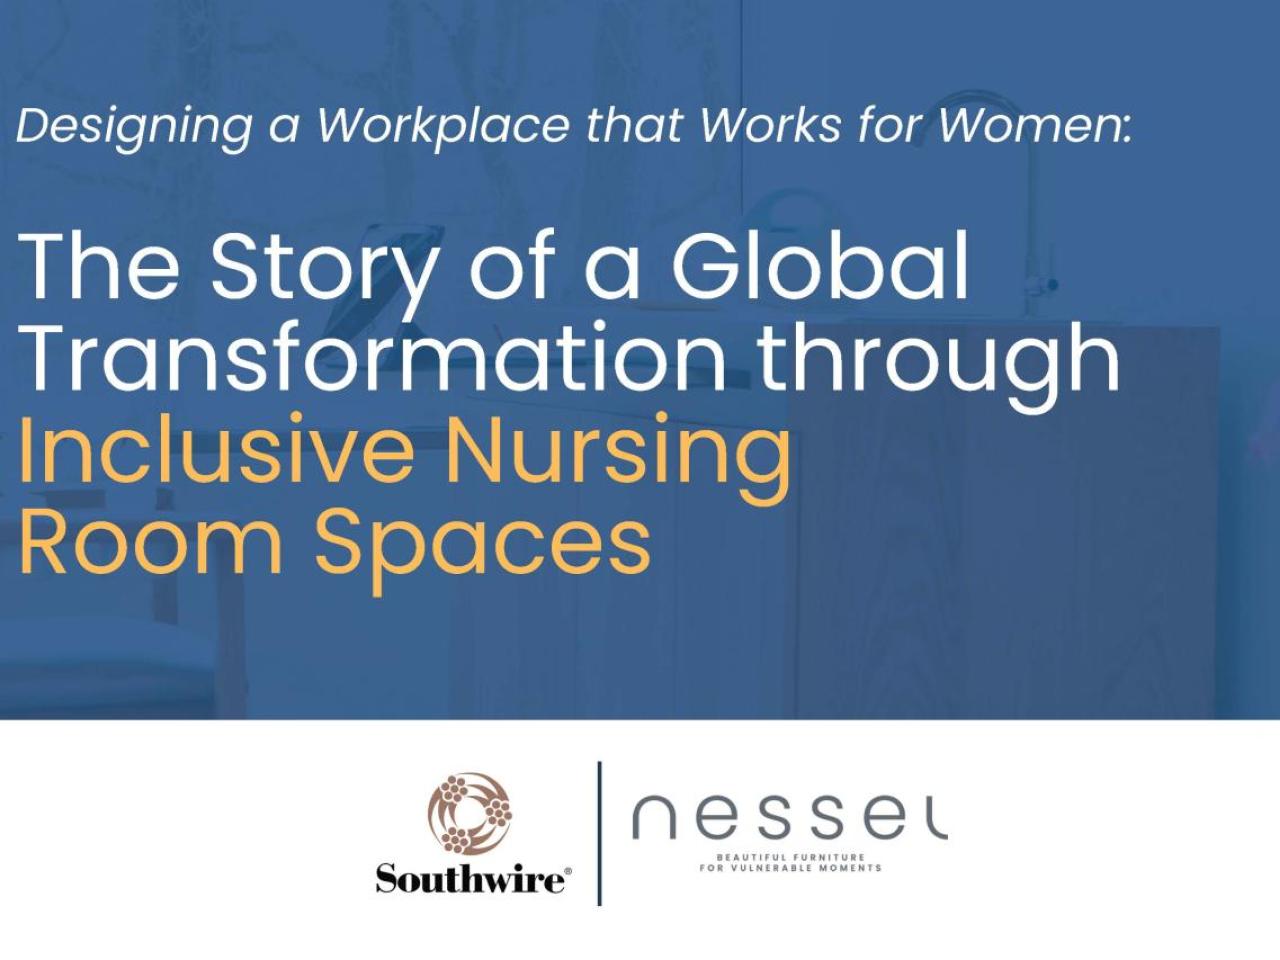 "Designing a workplace that works for women: The story of a global transformation through inclusive nursing spaces."